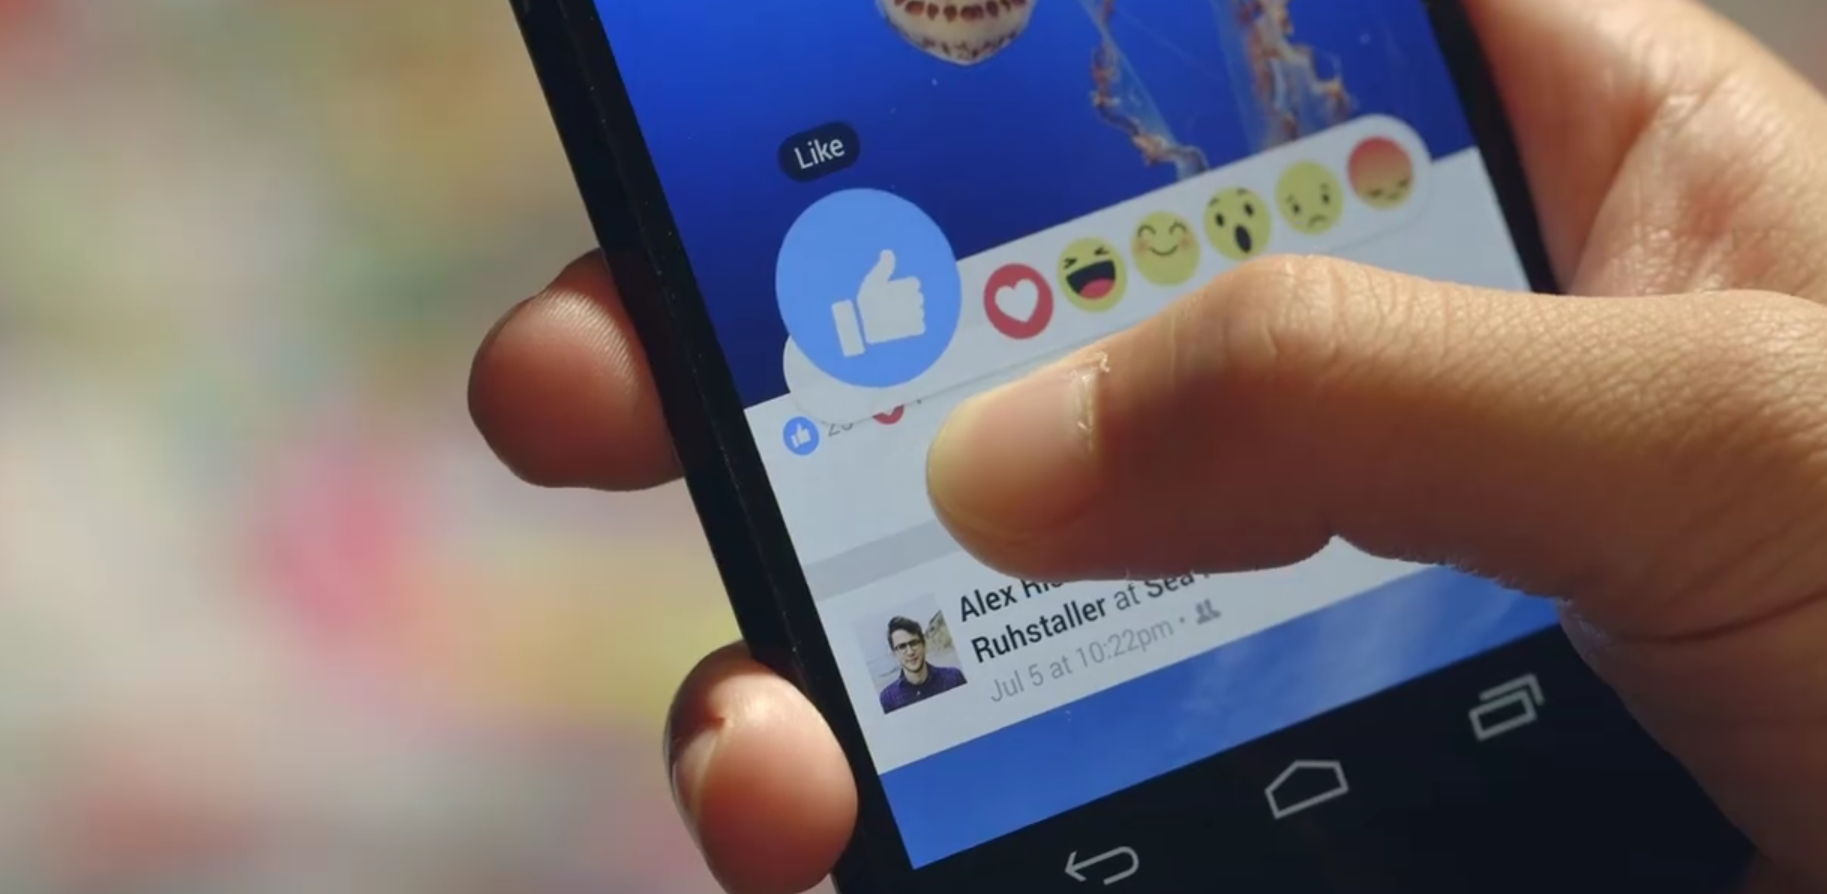 How “Dislike” button data could change Facebook marketing forever